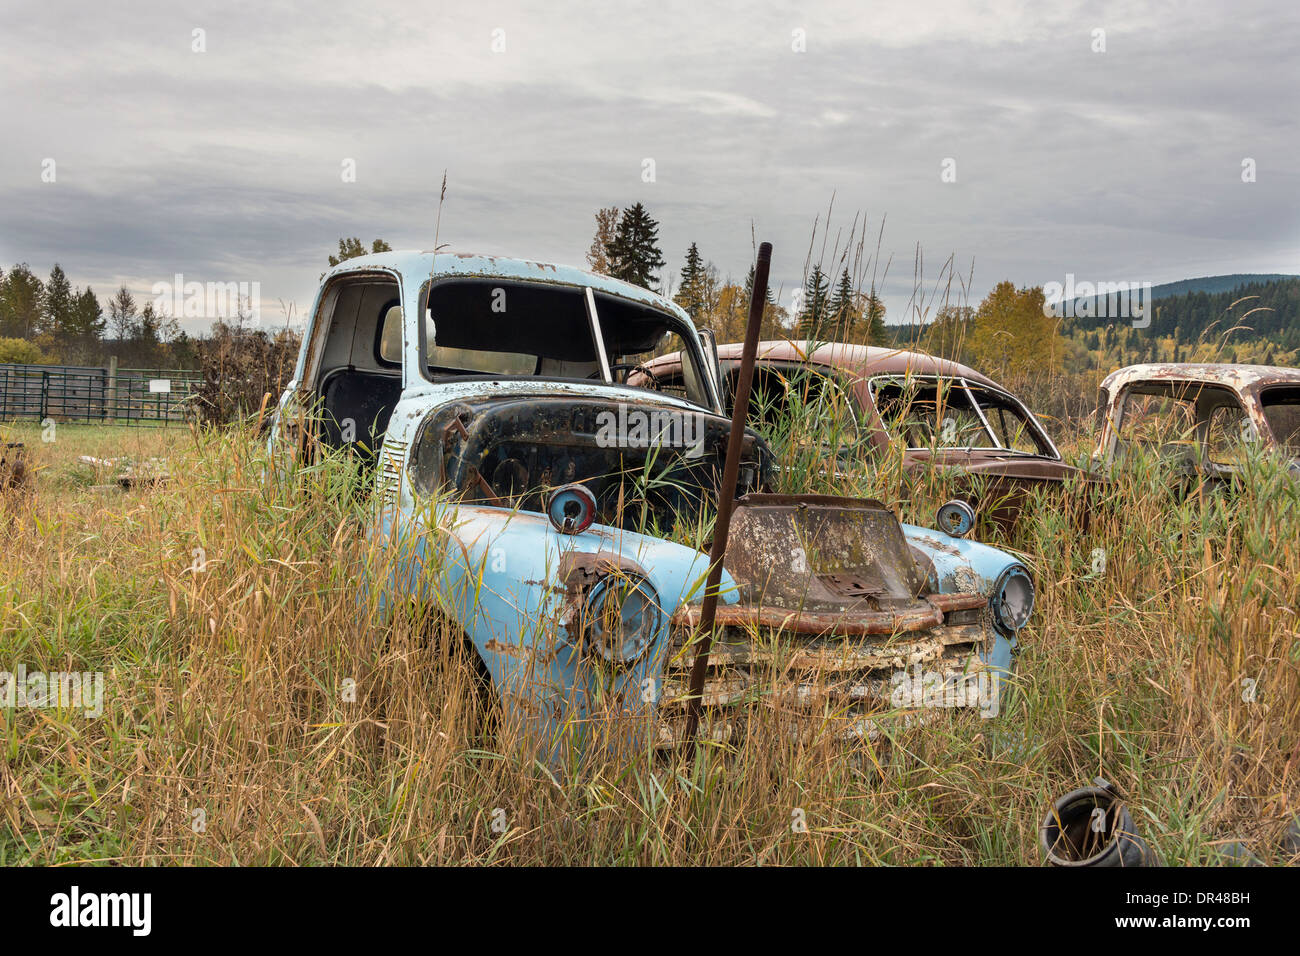 Abandoned old truck and cars, on a farm near Likely, Cariboo-Chilcotin region, British Columbia Stock Photo